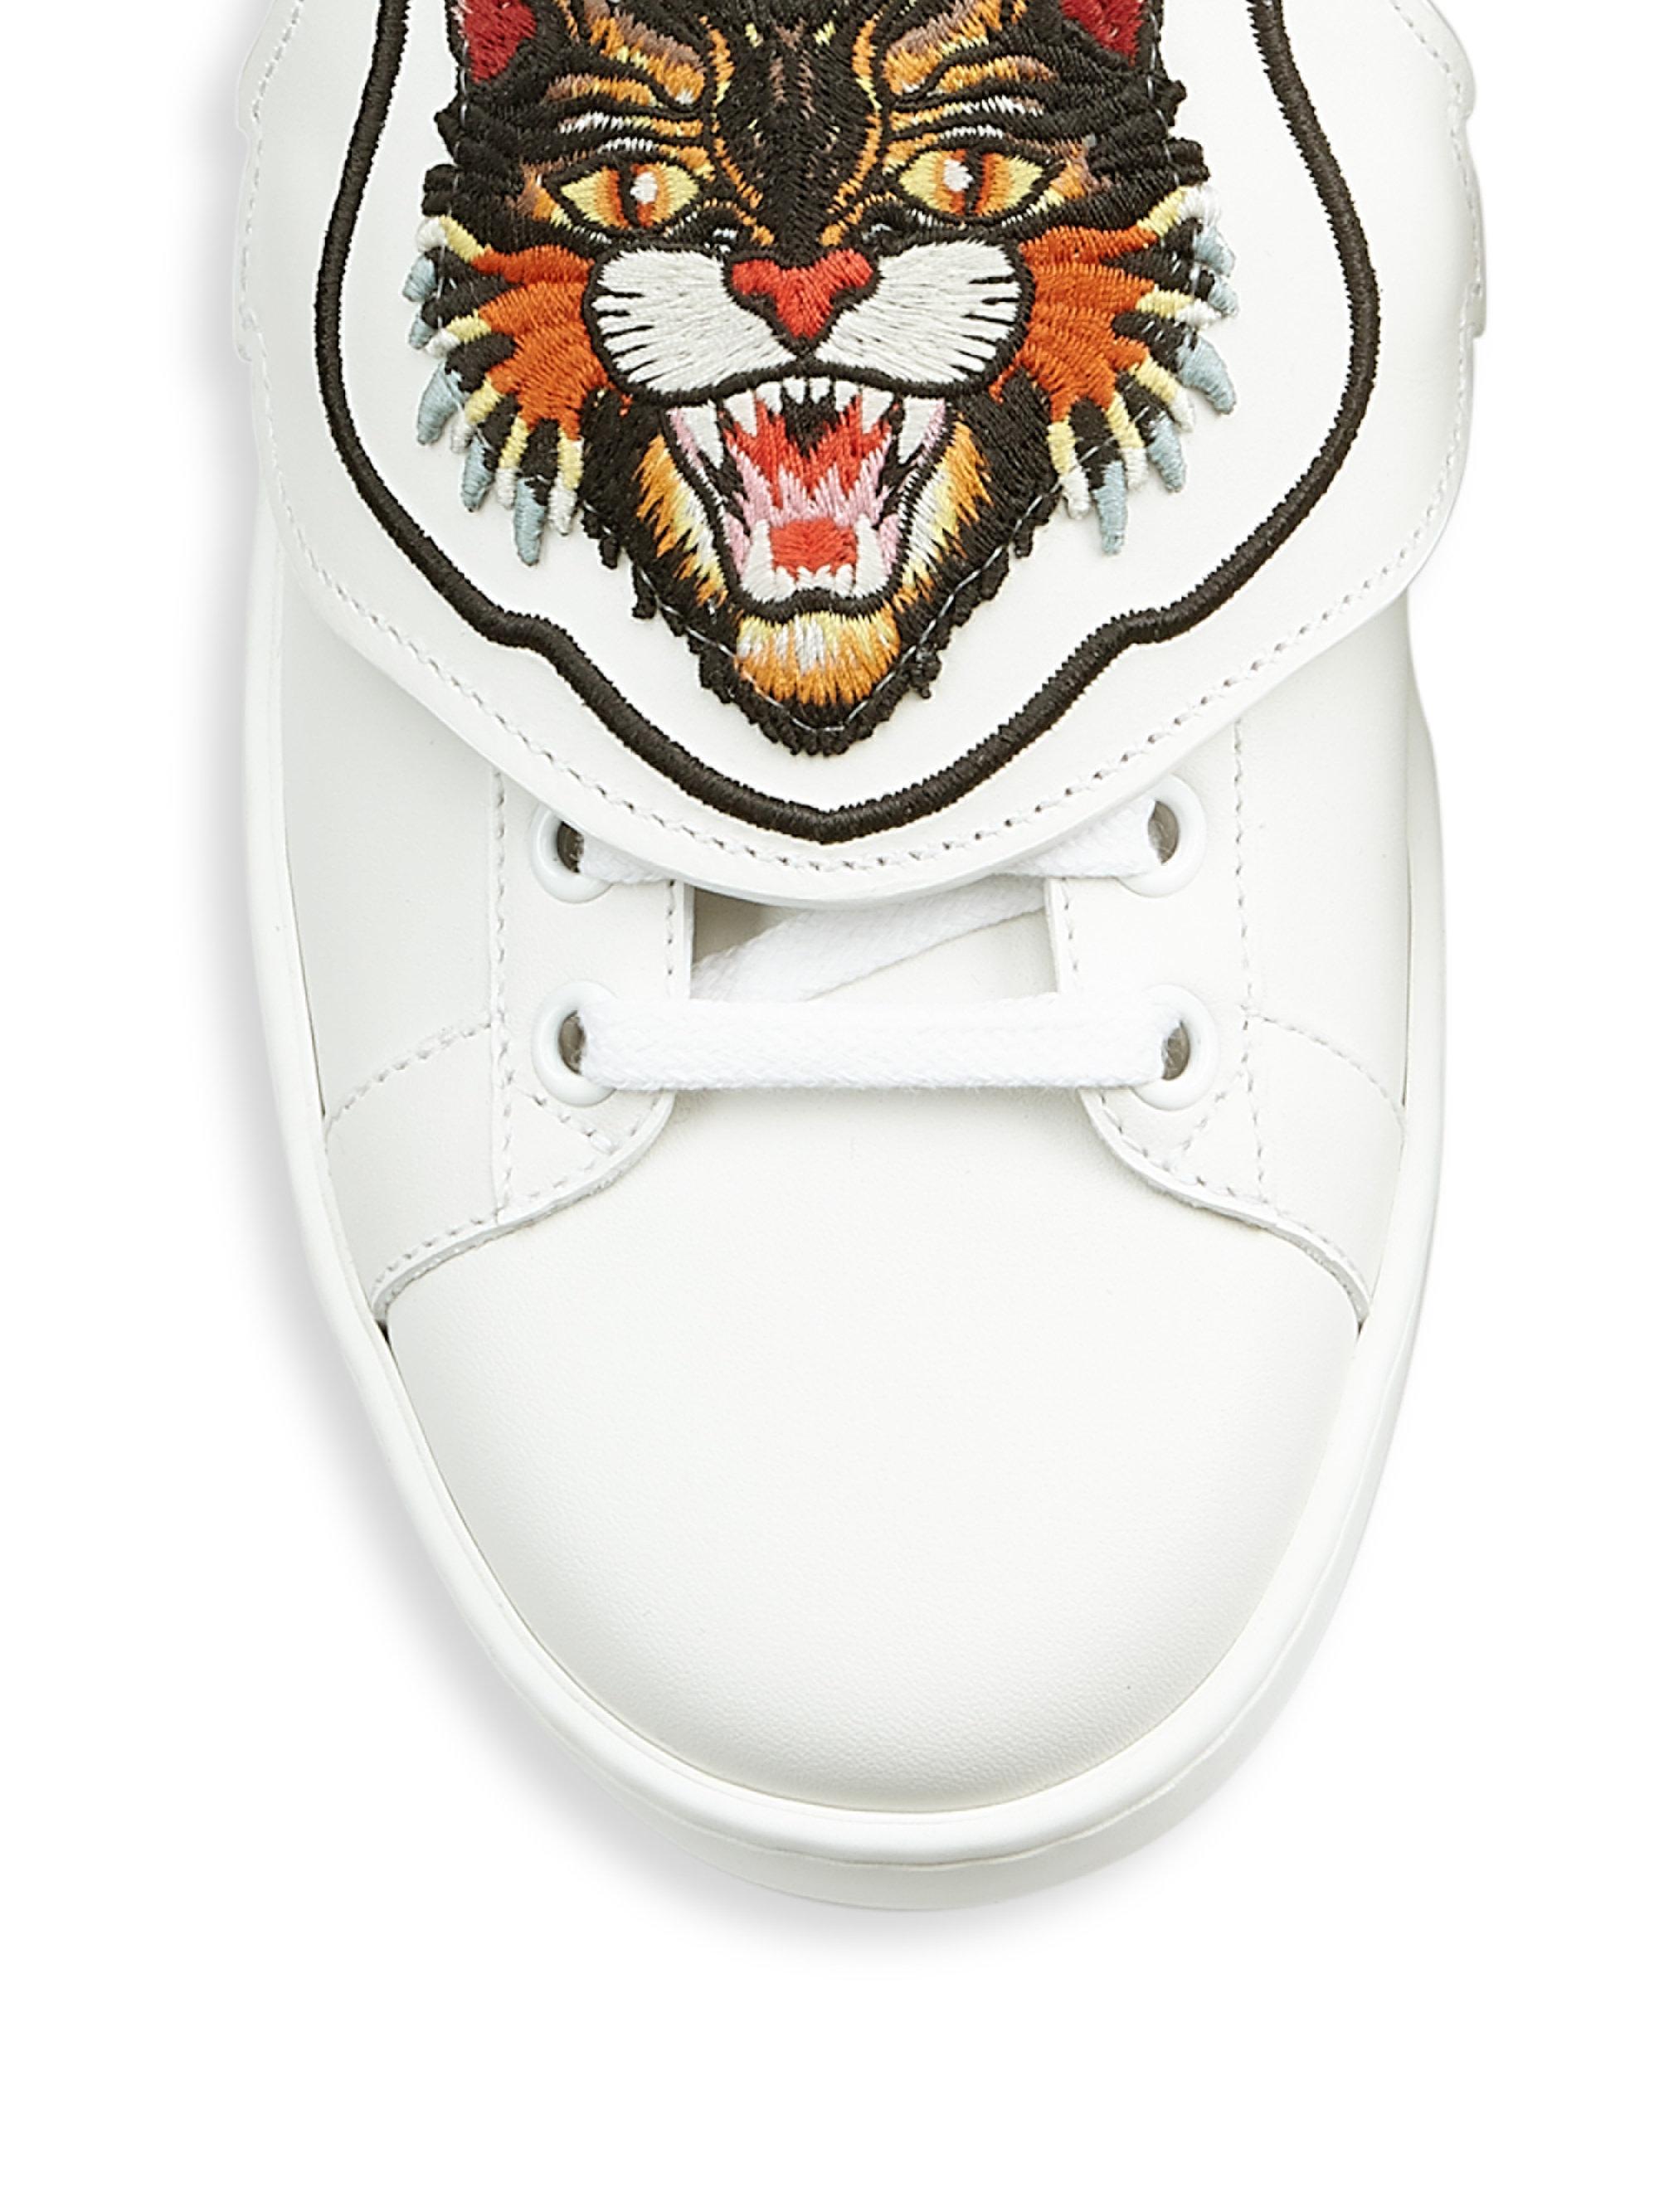 gucci lion sneakers